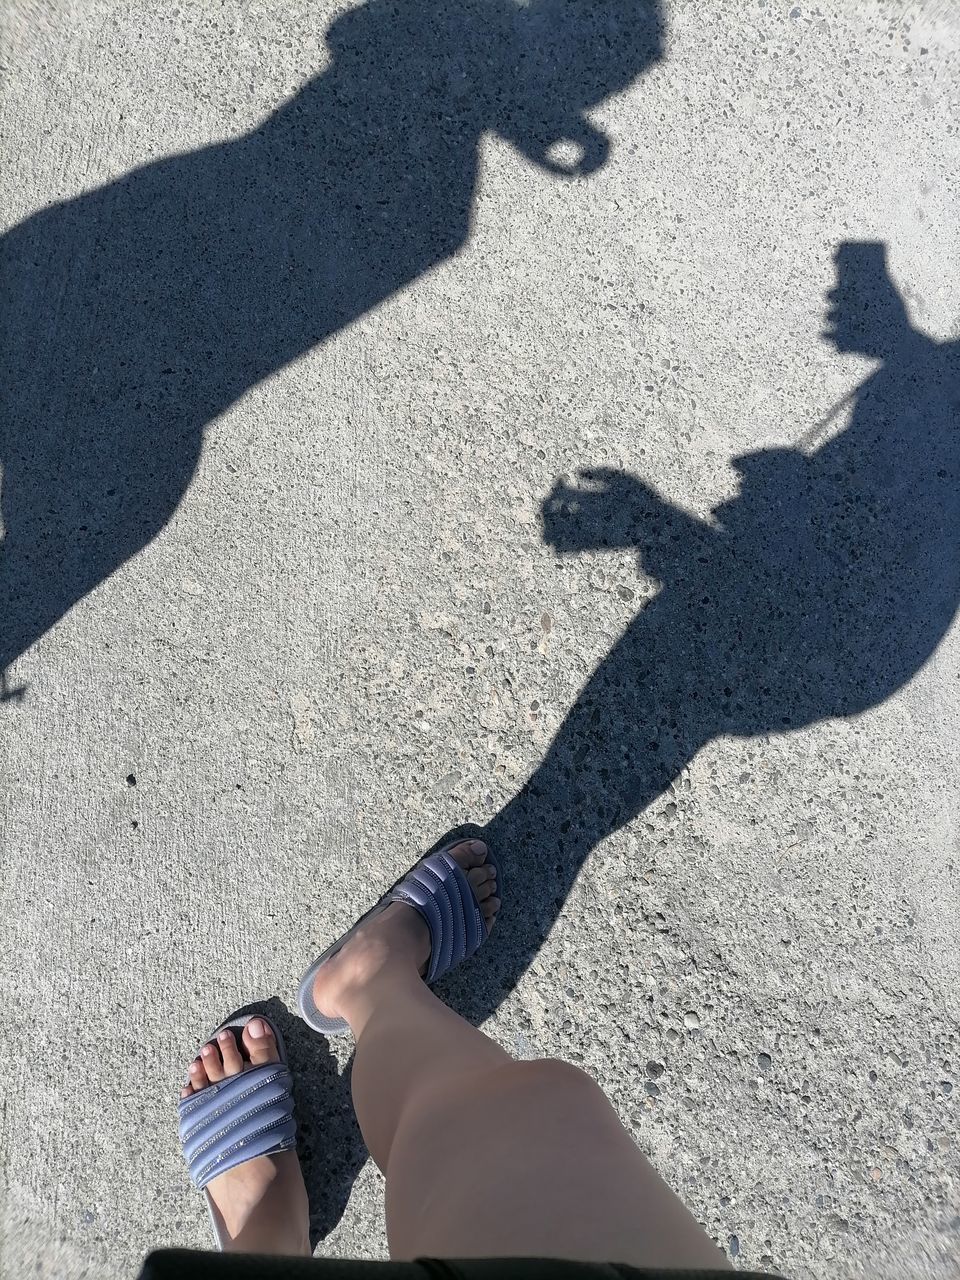 shadow, sunlight, high angle view, blue, low section, lifestyles, one person, day, nature, human leg, leisure activity, black, focus on shadow, adult, women, city, men, outdoors, road, standing, street, hand, limb, human limb, personal perspective, shoe, sunny, footwear, sand, casual clothing